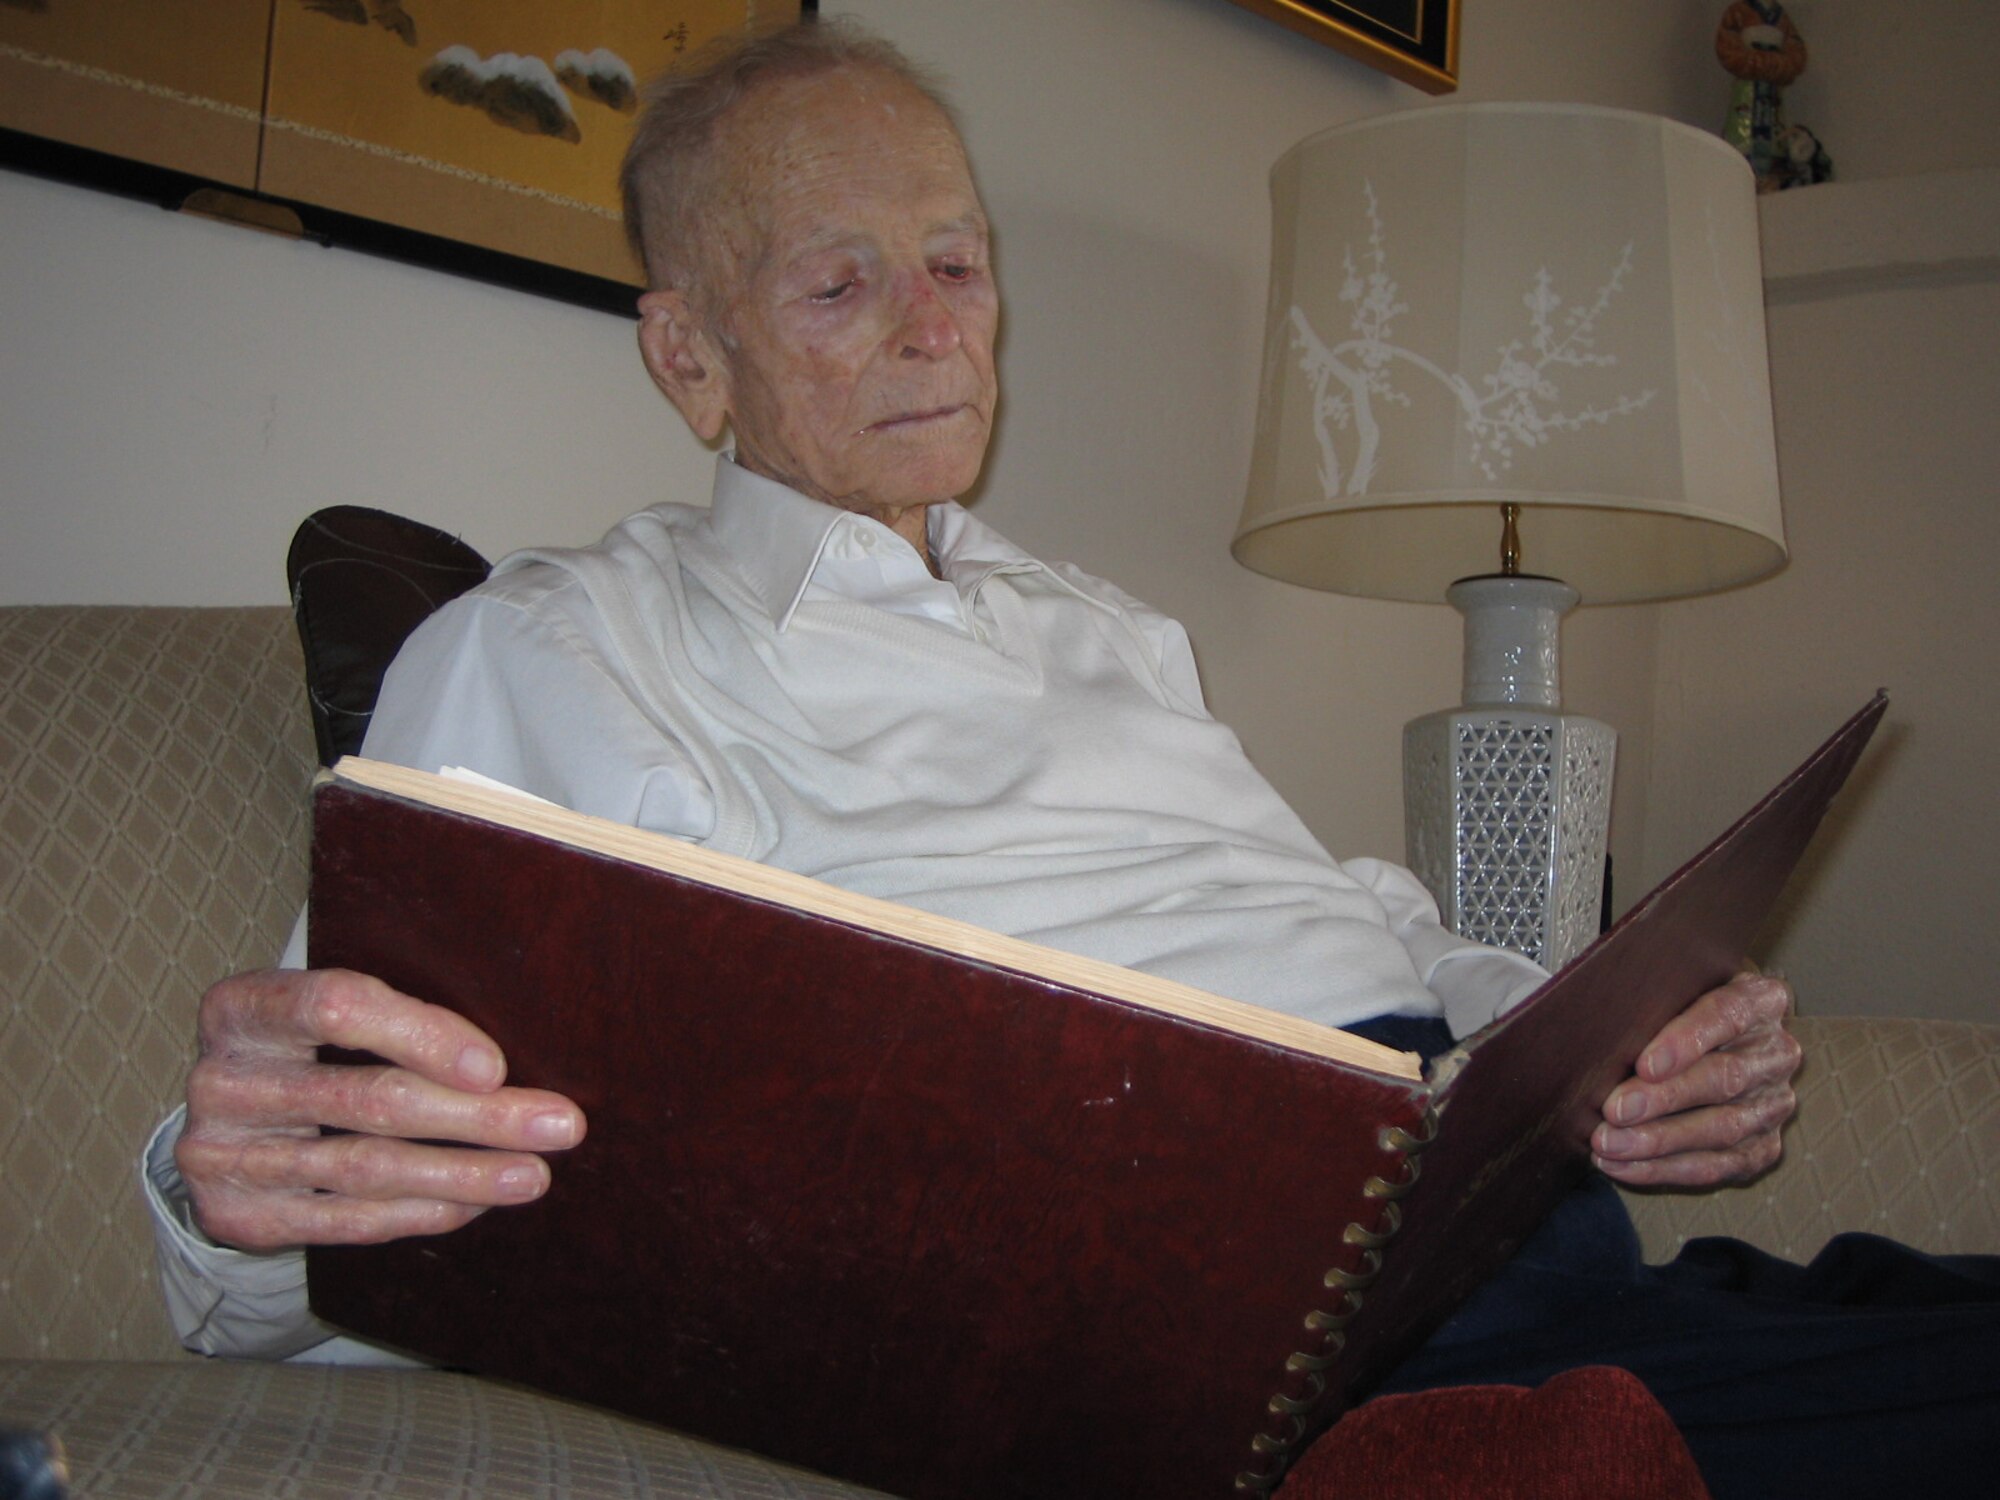 Retired Col. Walter Douglass, World War II P-51 Mustang pilot, looks through a book of Stalag Luft III, a German prison camp where he was a POW. Douglass was shot down in 1944 and taken prisoner on D-Day. The book included drawings of the prison camp and photos that were smuggled out. (photo by Tech. Sgt. Robert Zoellner)